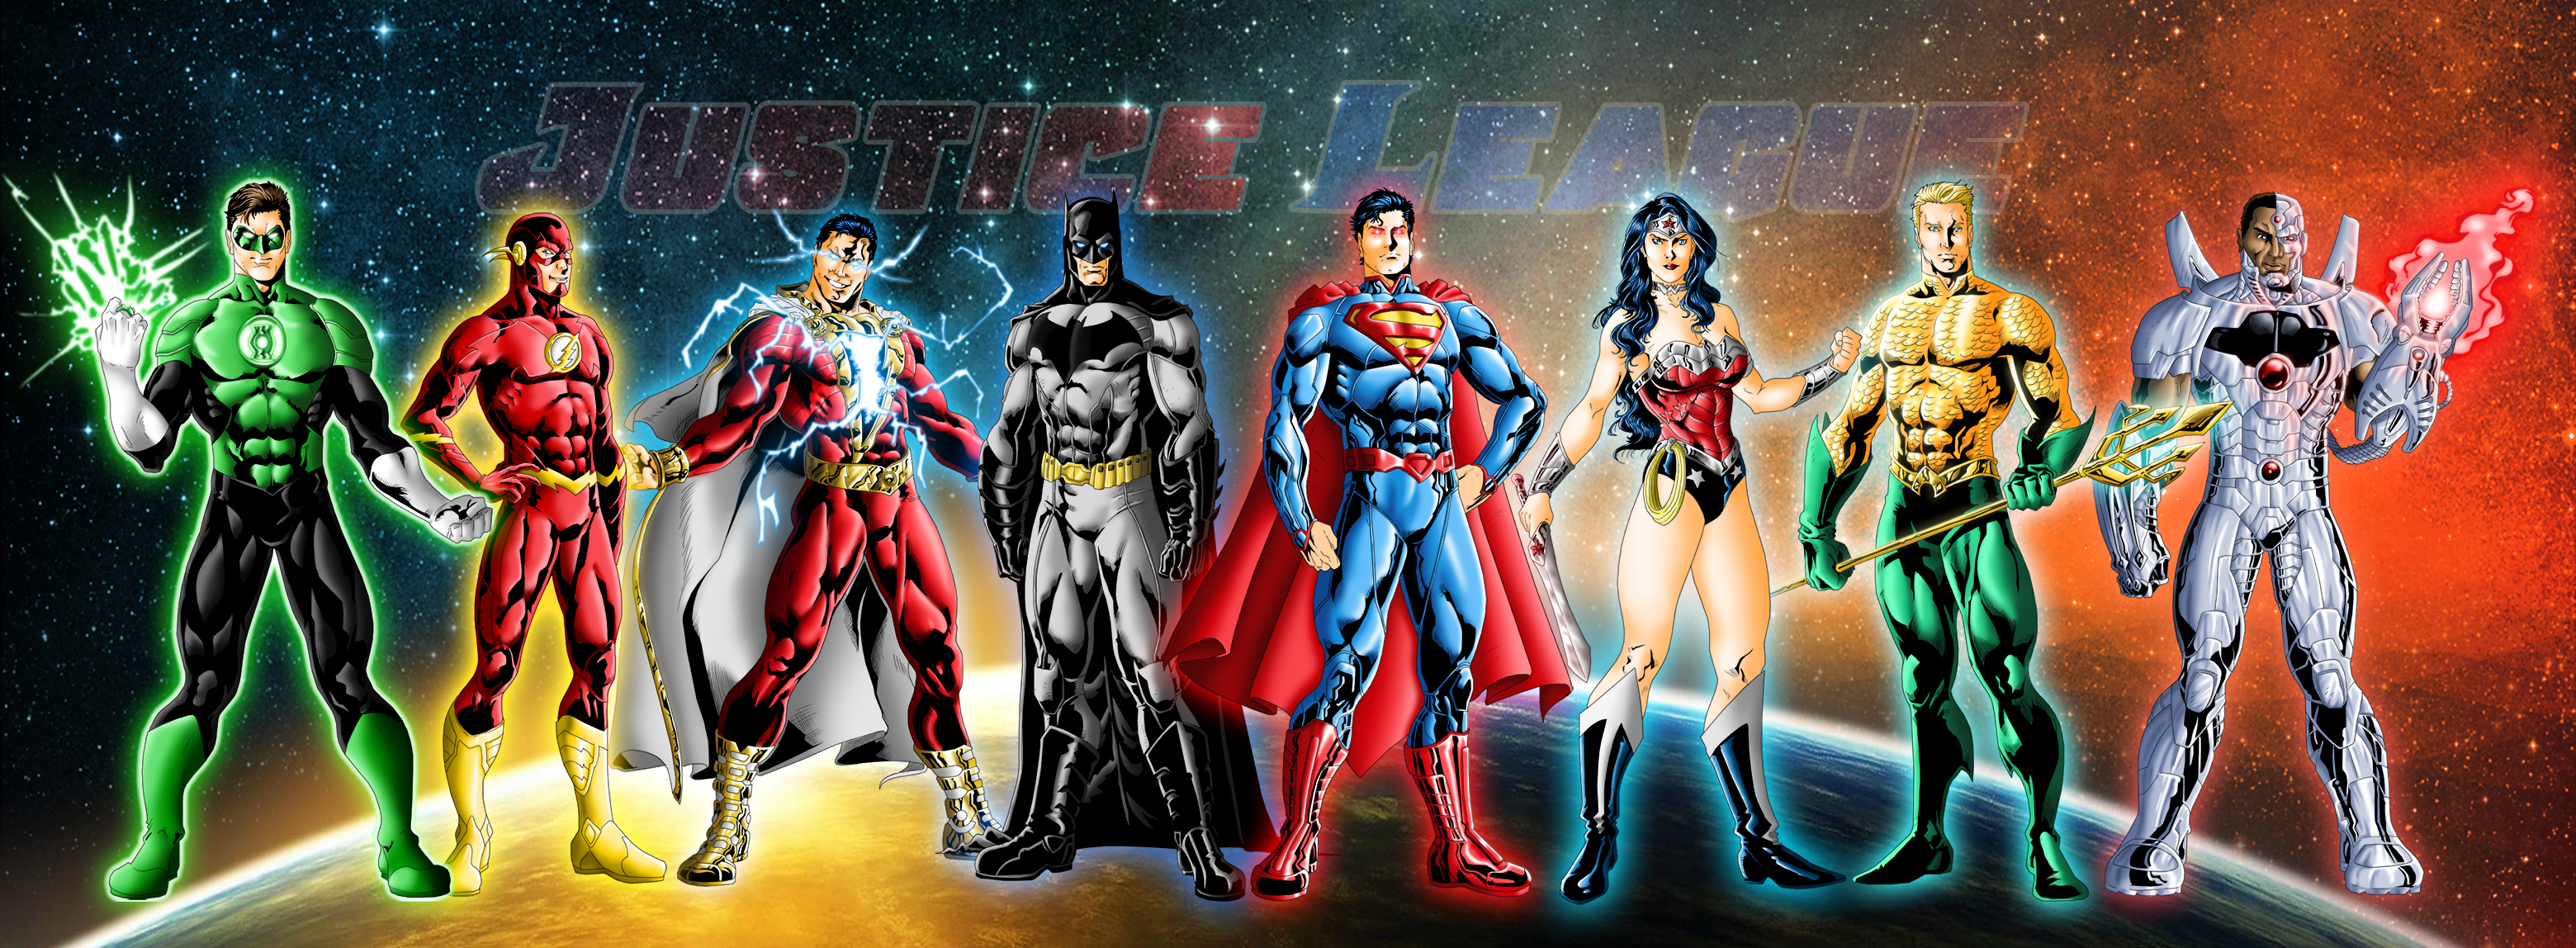 94 Justice League HD Wallpapers Backgrounds   Wallpaper